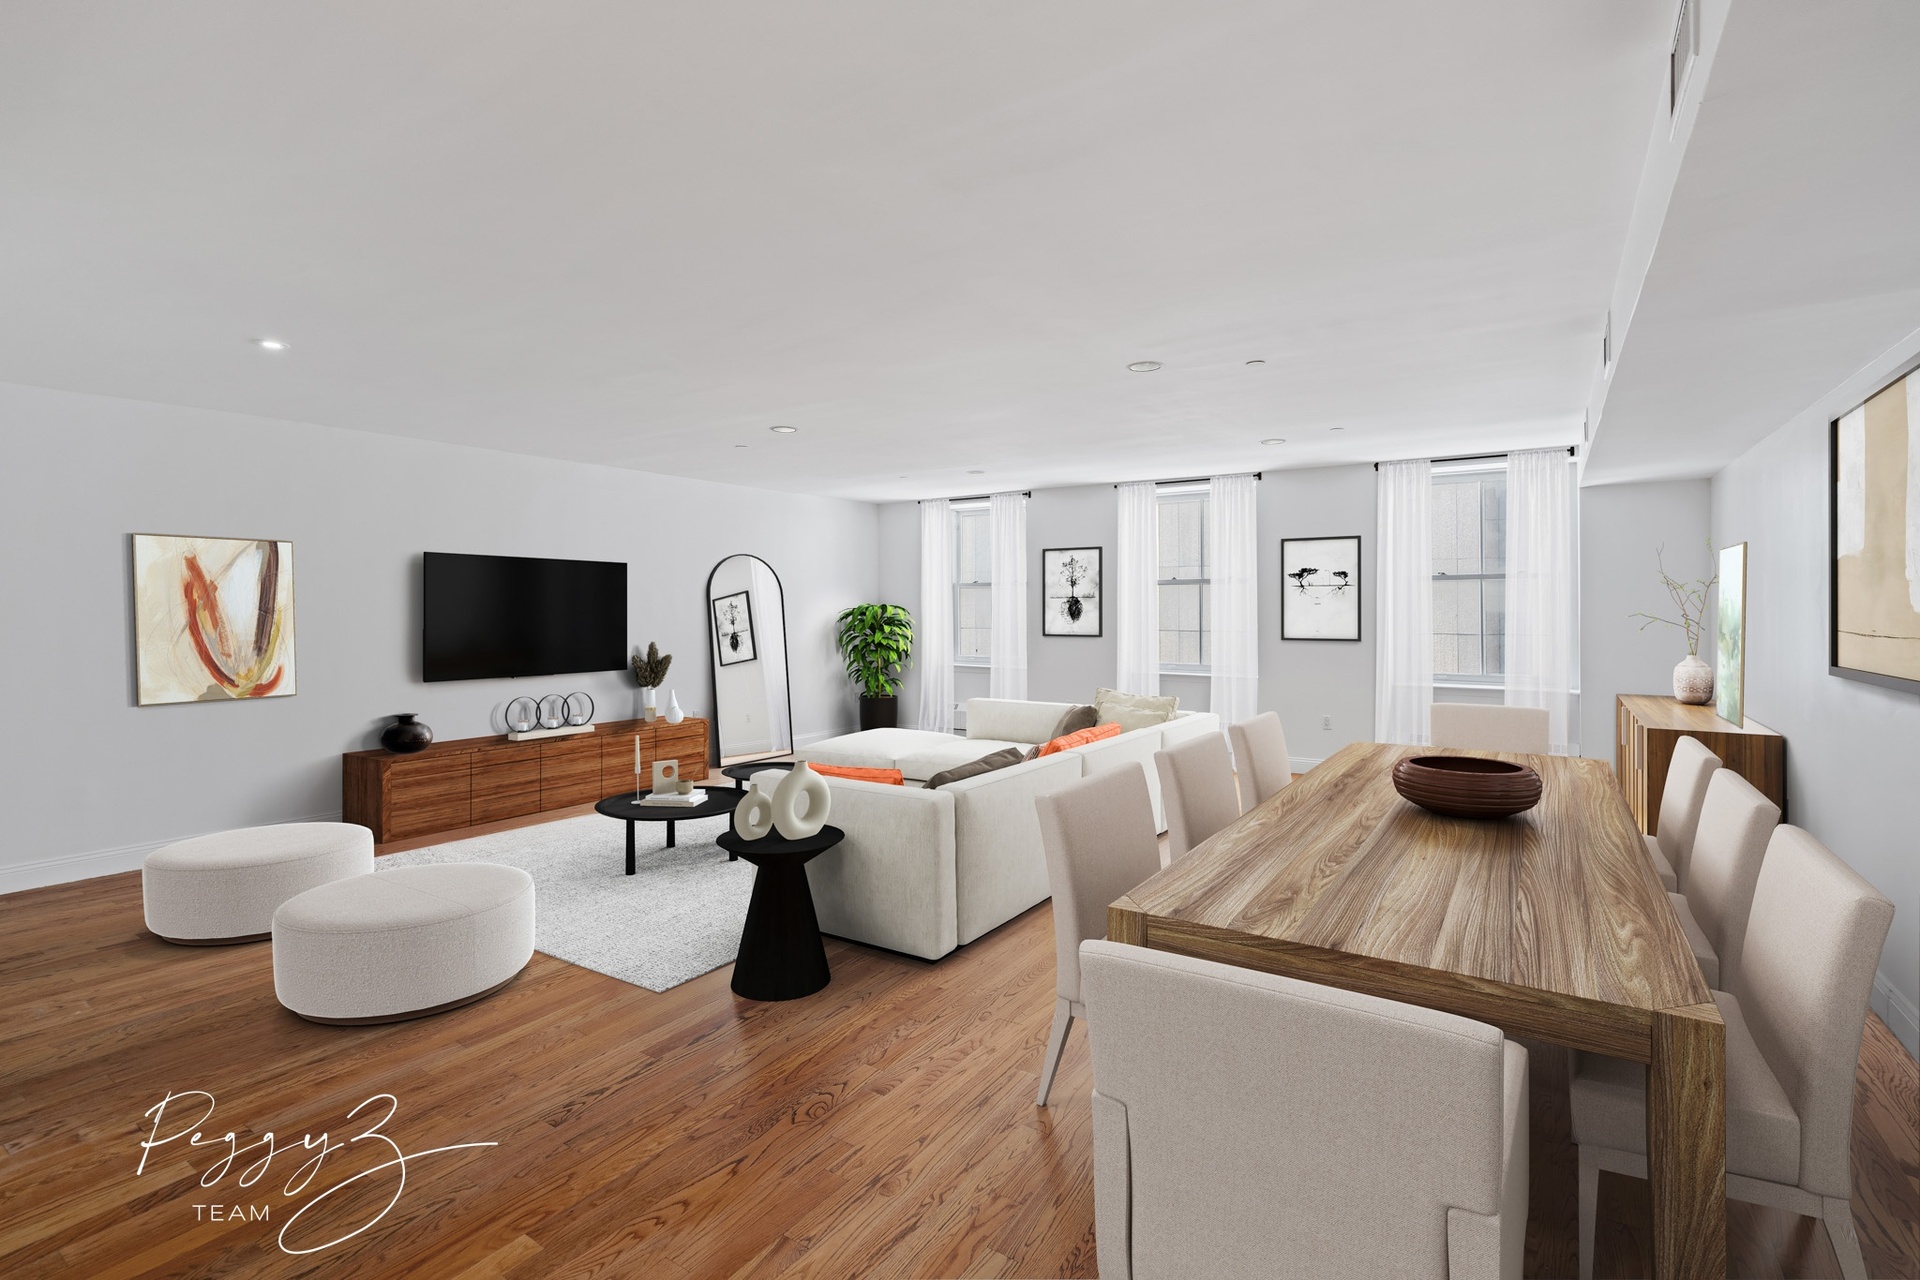 73 Worth Street 5-E, Tribeca, Downtown, NYC - 2 Bedrooms  
2 Bathrooms  
4 Rooms - 